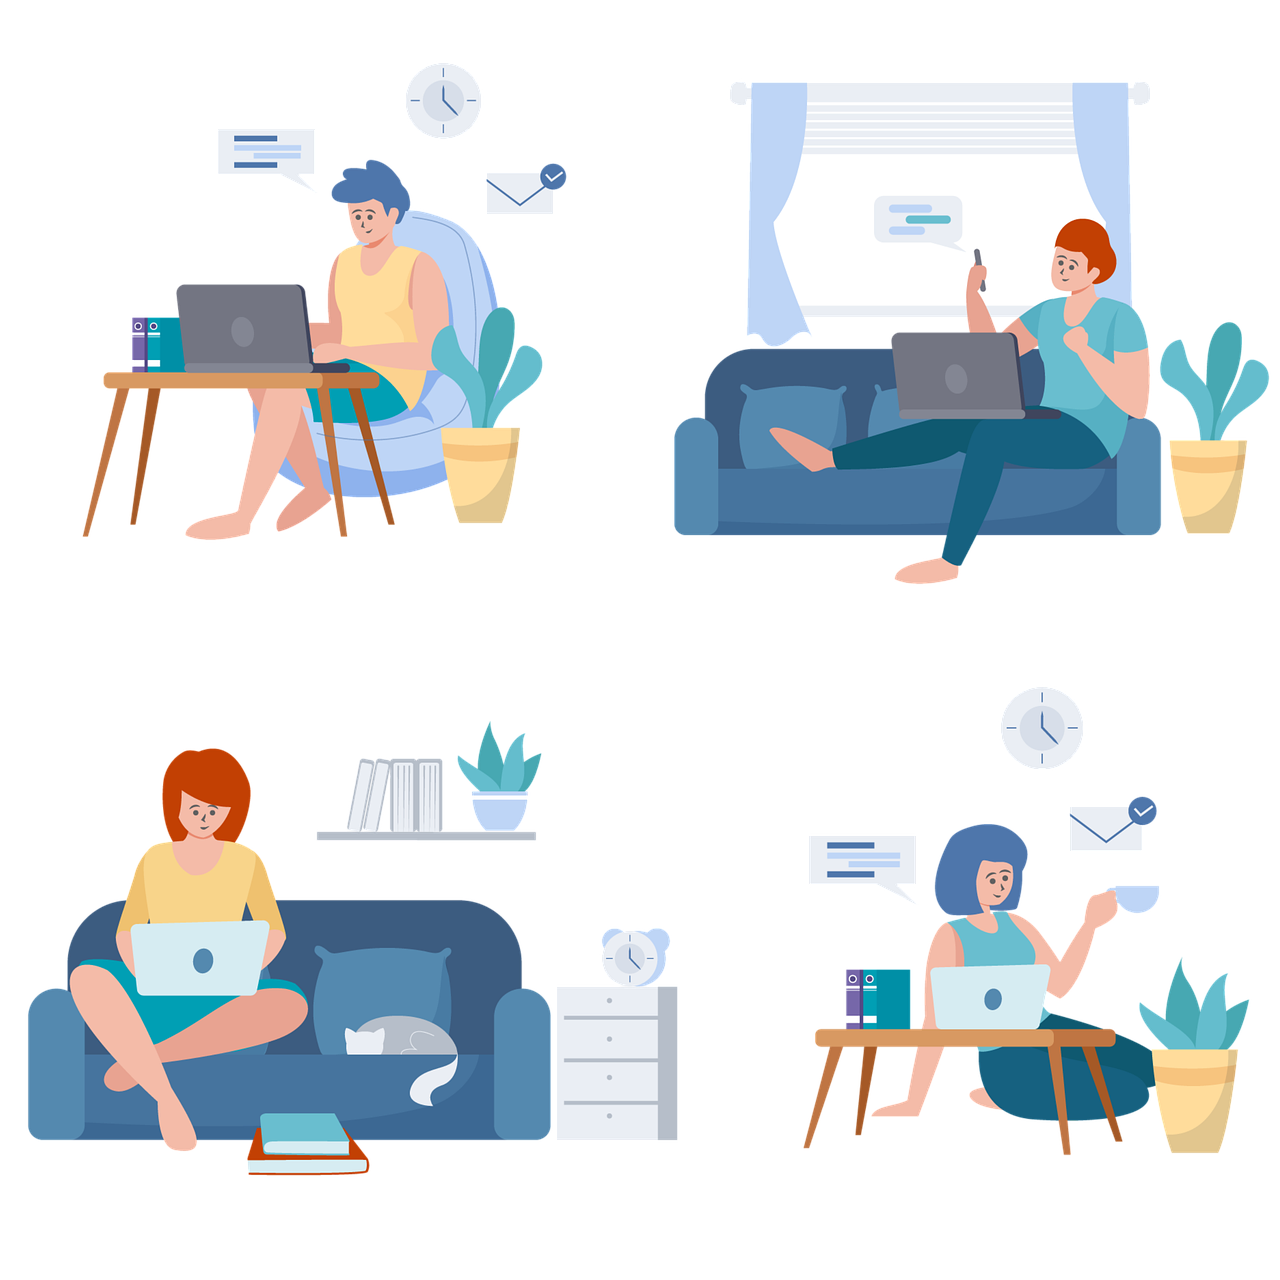 mastering the art of building trust in remote work environments